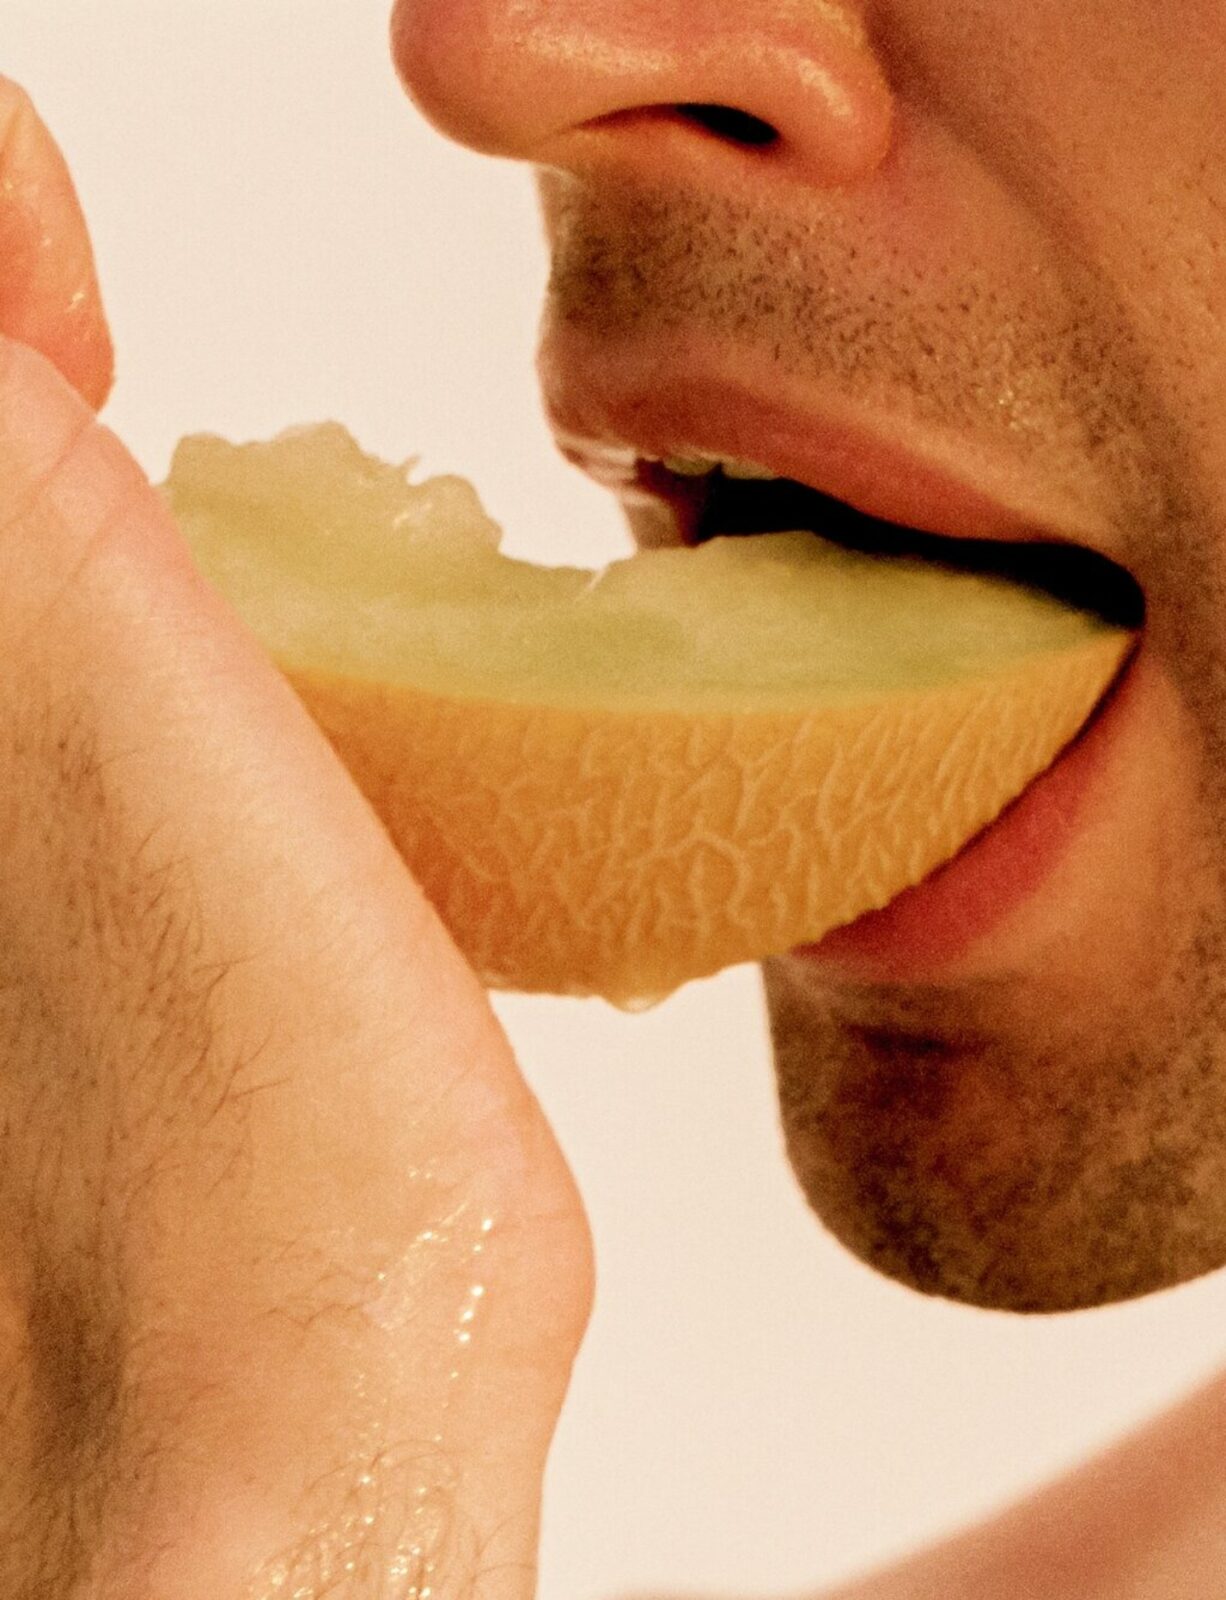 Man eating melon juicy fruit dripping food porn